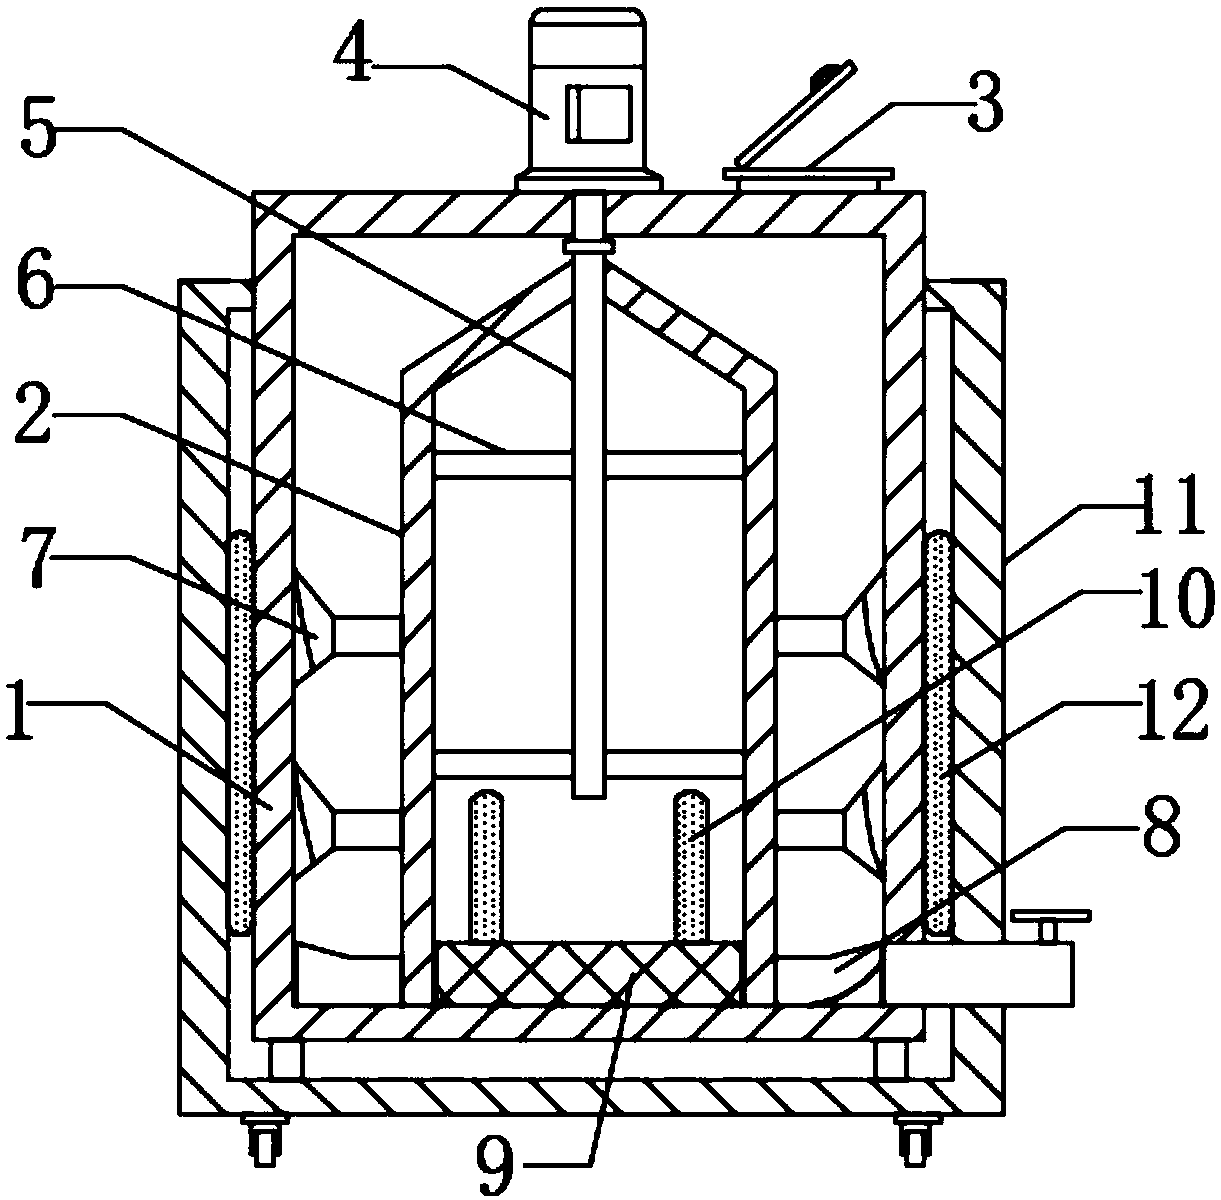 Fusion device for yellow lead production